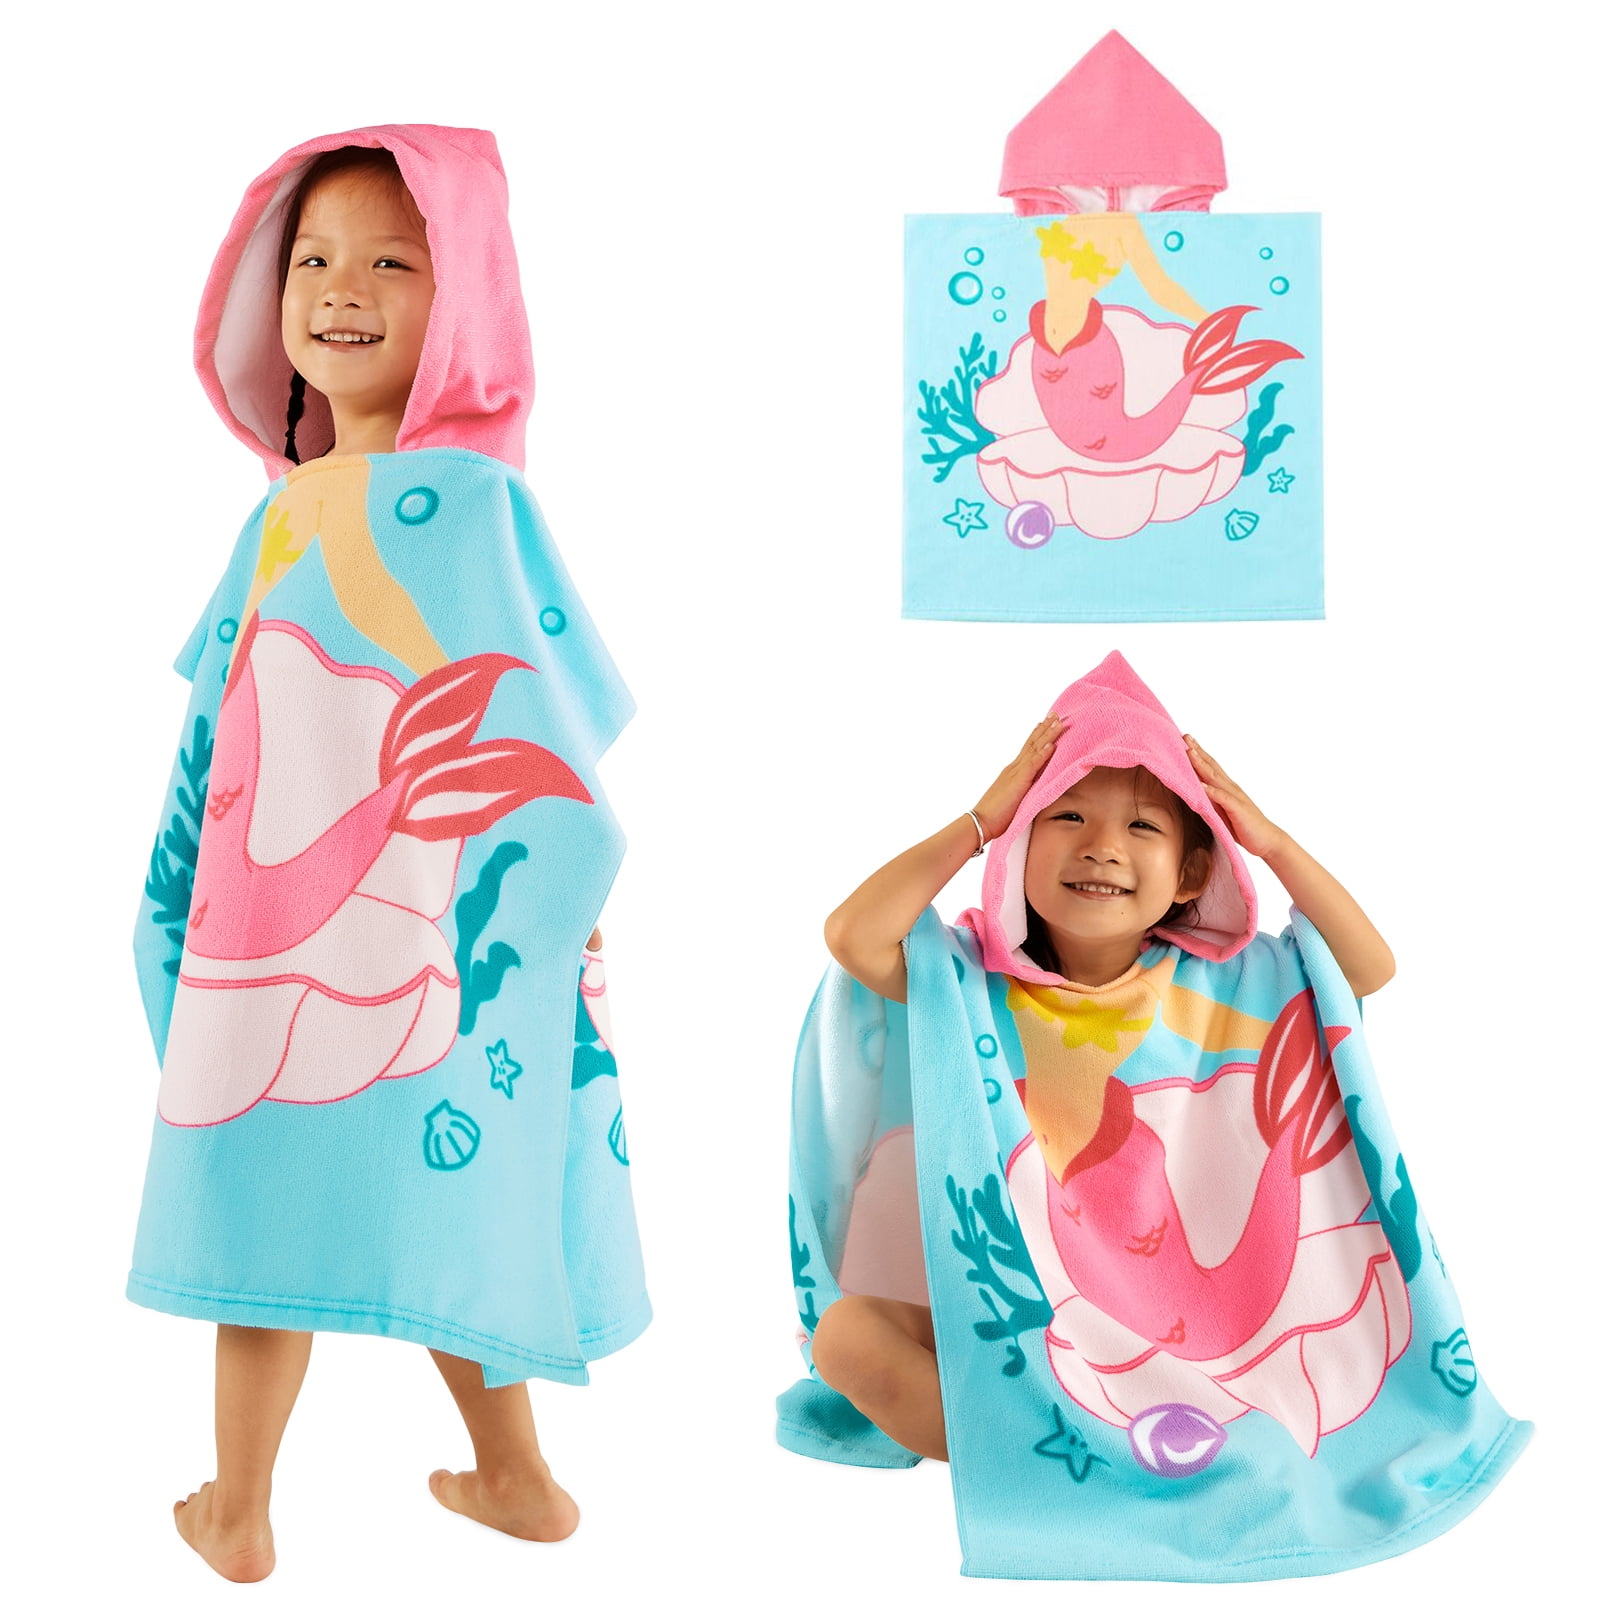 nuosen Kids Hooded Towel,Poncho Bath Towel Cotton Microfiber Cartoon Fast Drying Bath Towel for Swimming Beach 23.6X47.24  inches